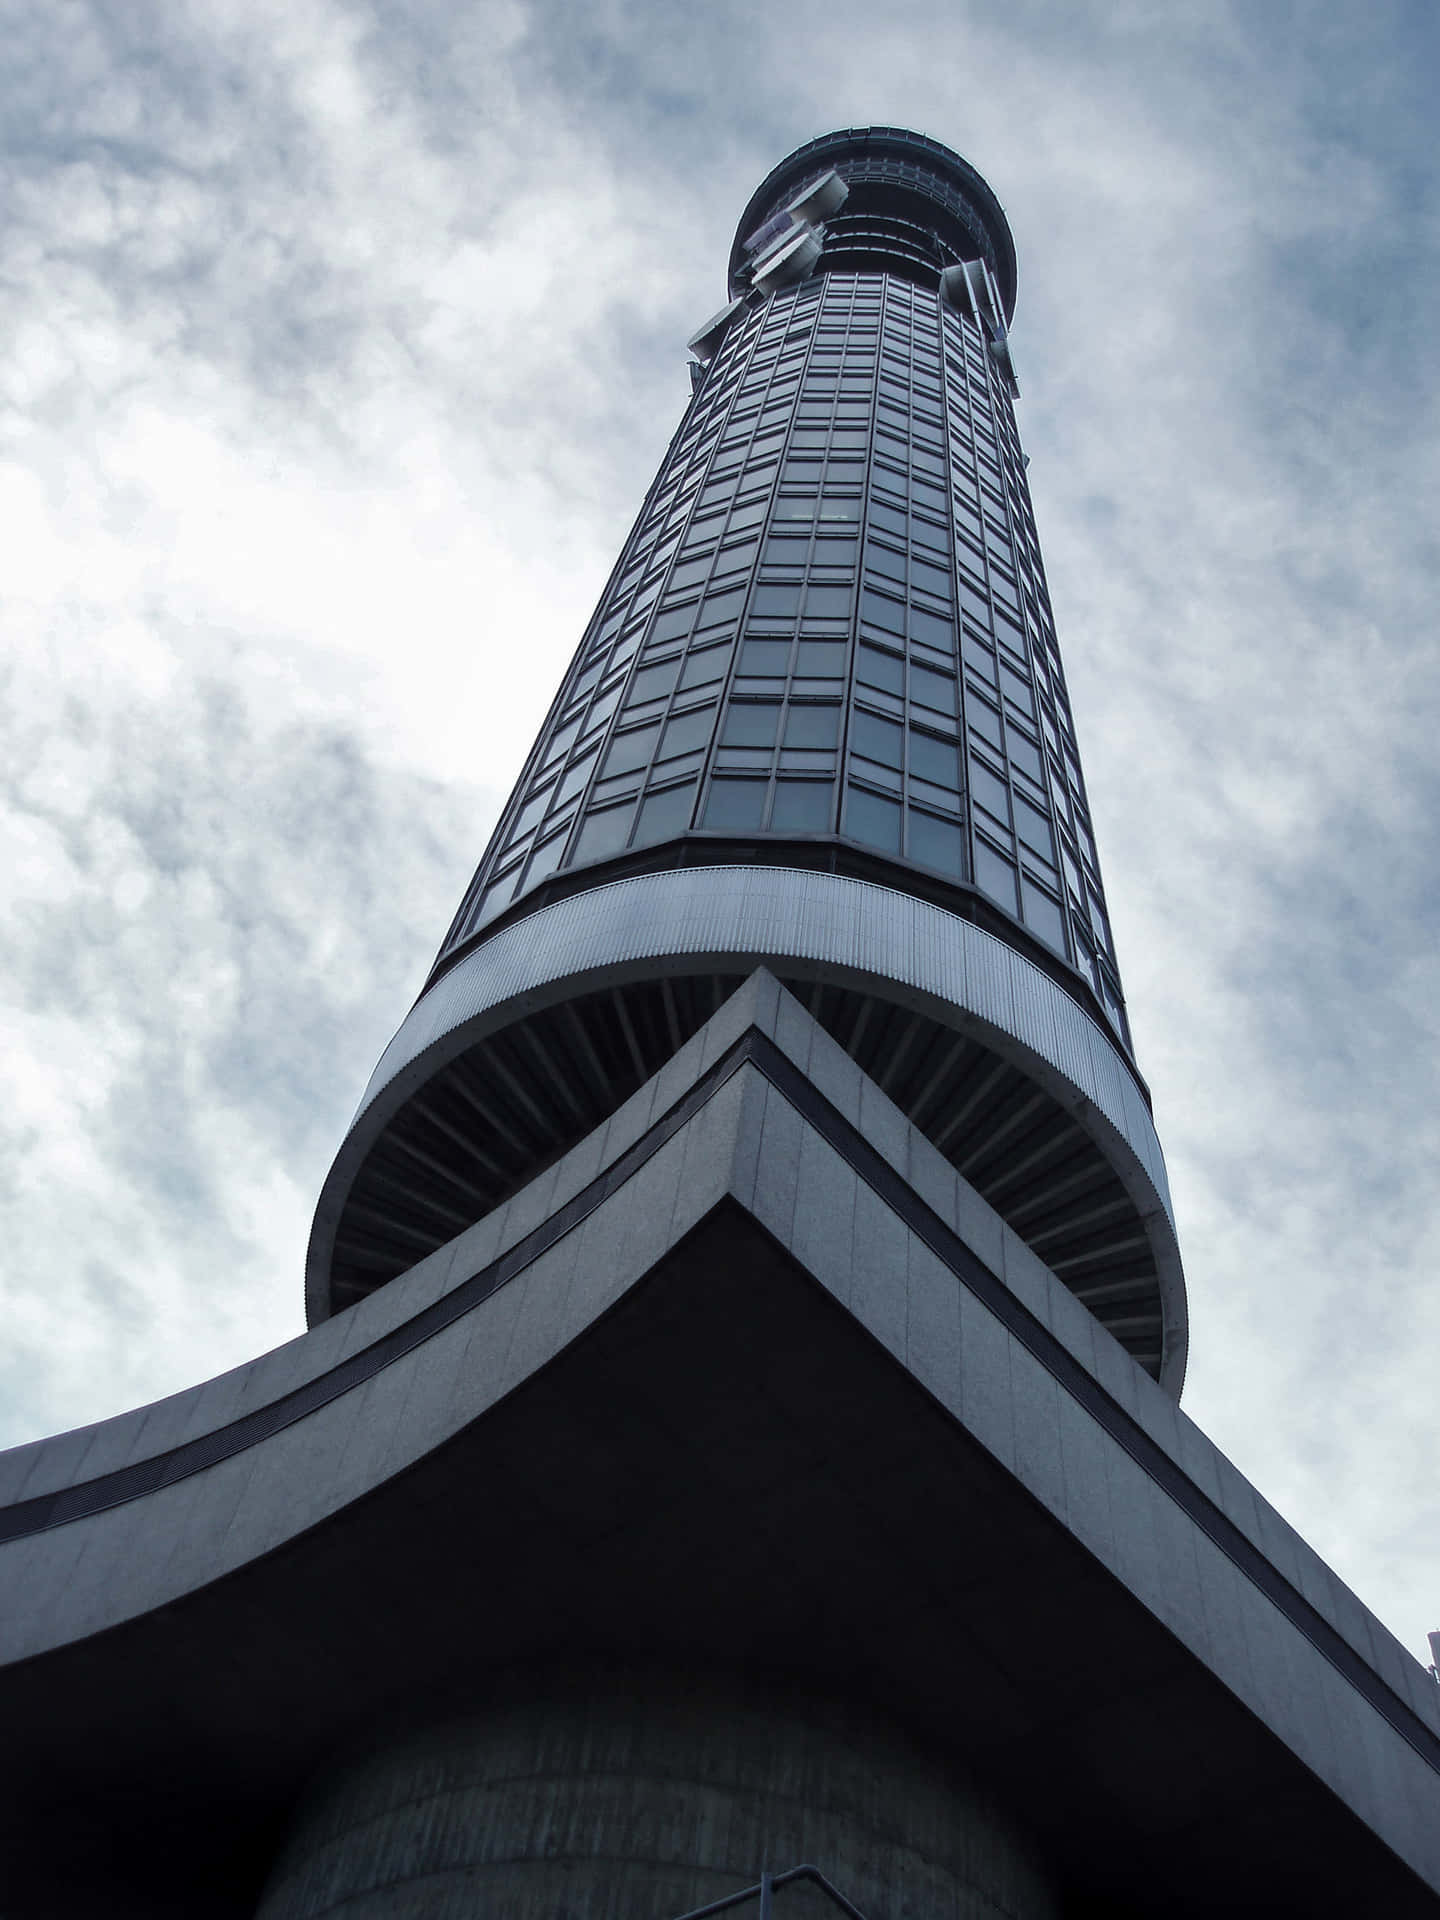 BT Tower Looking Tall And Imposing Wallpaper